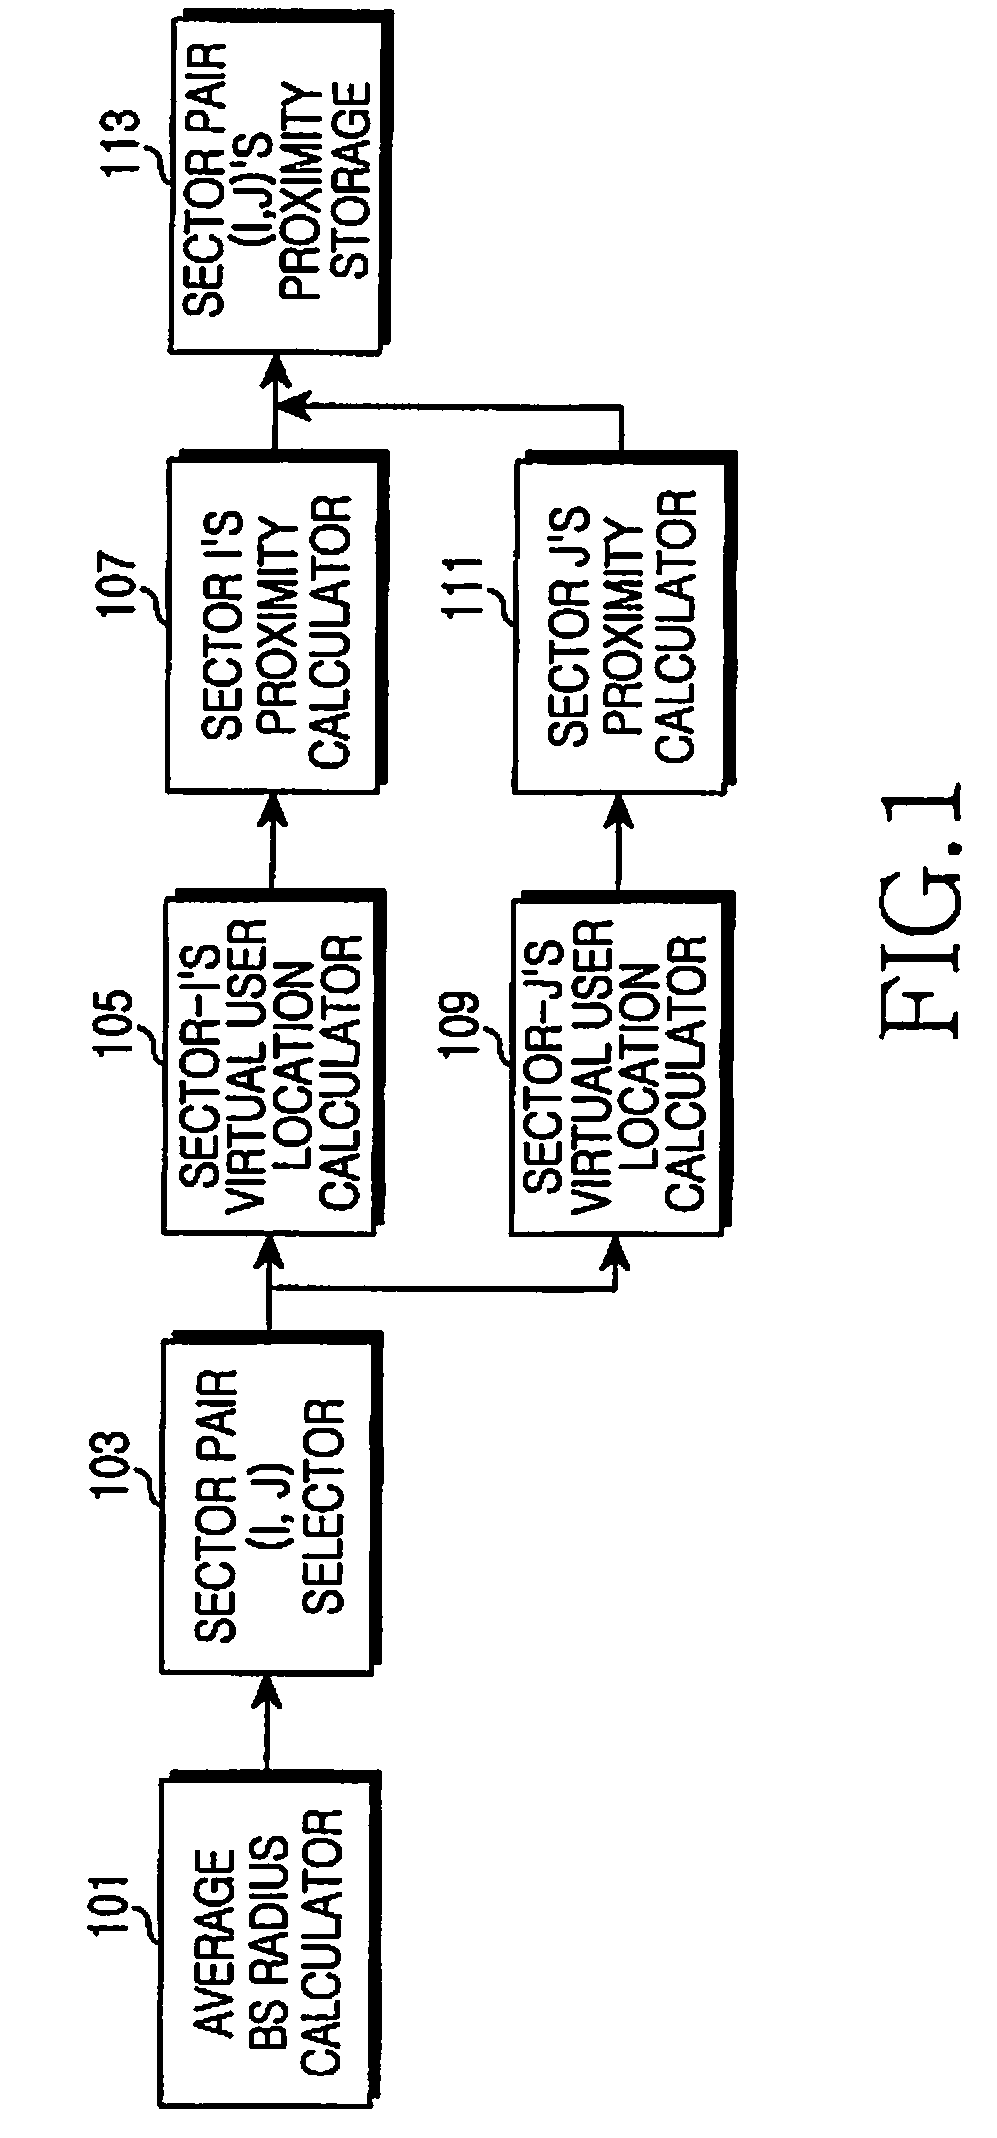 Apparatus and method for reallocating segments in broadband wireless communication system